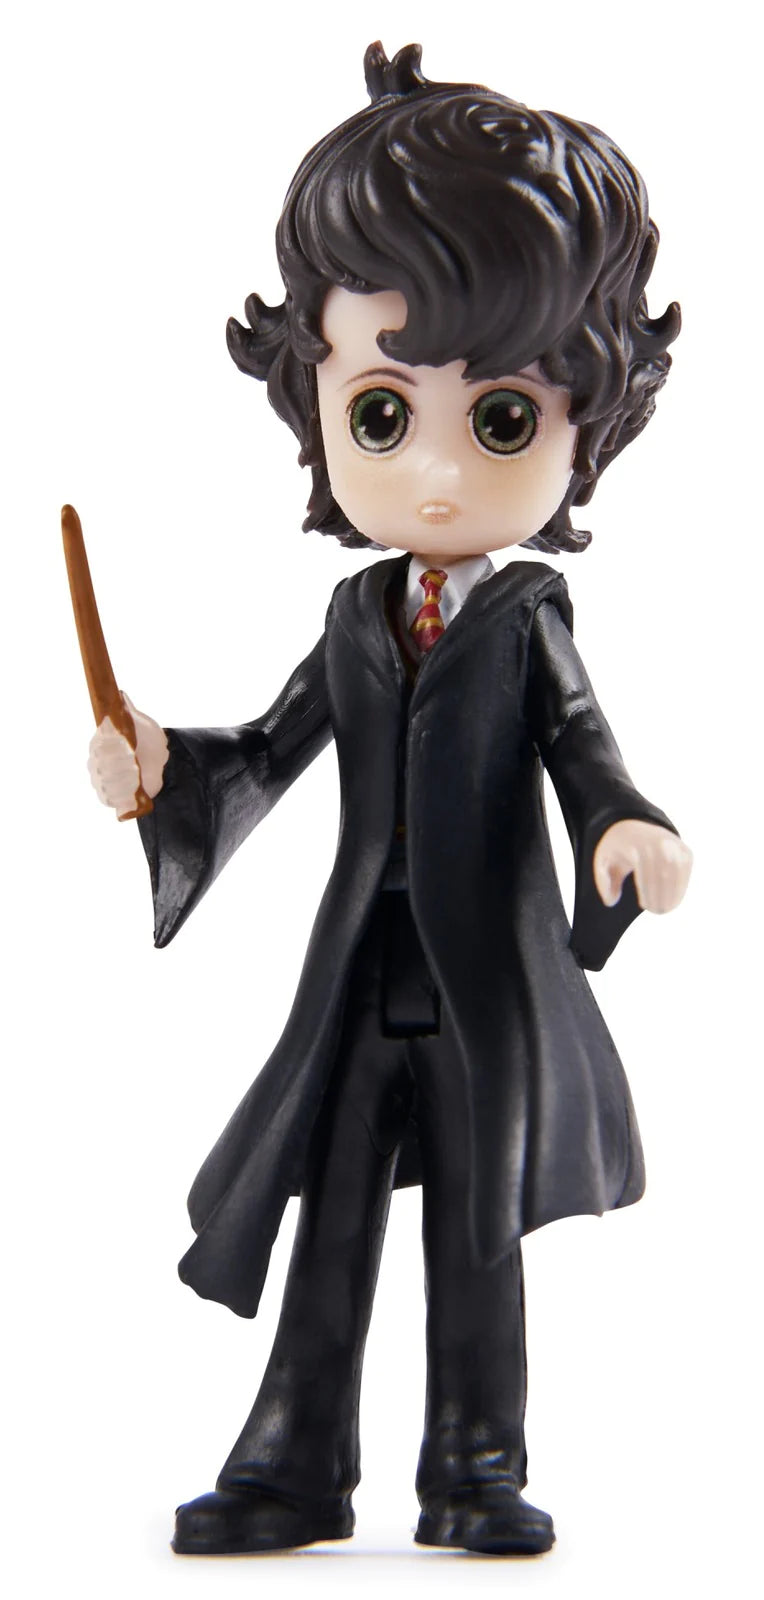 Wizarding World Harry Potter, Magical Minis Collectible 3-inch Neville Longbottom Figure, Kids Toys for Ages 6 and up